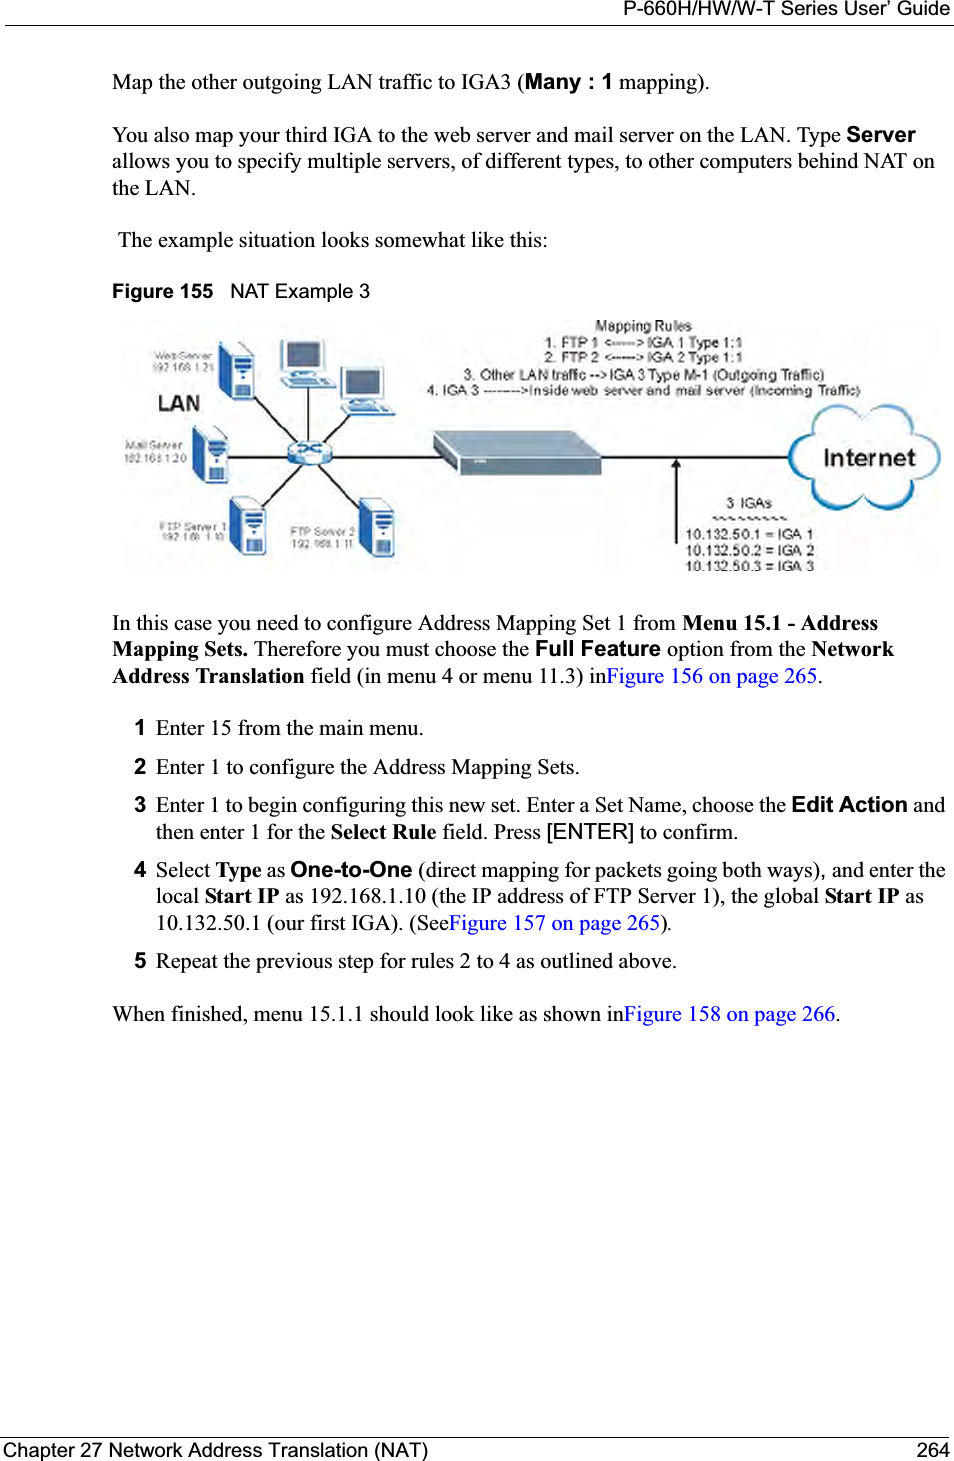 P-660H/HW/W-T Series User’ GuideChapter 27 Network Address Translation (NAT) 264Map the other outgoing LAN traffic to IGA3 (Many : 1 mapping).You also map your third IGA to the web server and mail server on the LAN. Type Serverallows you to specify multiple servers, of different types, to other computers behind NAT on the LAN. The example situation looks somewhat like this:Figure 155   NAT Example 3In this case you need to configure Address Mapping Set 1 from Menu 15.1 - Address Mapping Sets. Therefore you must choose the Full Feature option from the NetworkAddress Translation field (in menu 4 or menu 11.3) inFigure 156 on page 265.1Enter 15 from the main menu.2Enter 1 to configure the Address Mapping Sets.3Enter 1 to begin configuring this new set. Enter a Set Name, choose the Edit Action and then enter 1 for the Select Rule field. Press [ENTER] to confirm.4Select Type as One-to-One (direct mapping for packets going both ways),and enter the local Start IP as 192.168.1.10 (the IP address of FTP Server 1), the global Start IP as10.132.50.1 (our first IGA). (SeeFigure 157 on page 265).5Repeat the previous step for rules 2 to 4 as outlined above. When finished, menu 15.1.1 should look like as shown inFigure 158 on page 266.